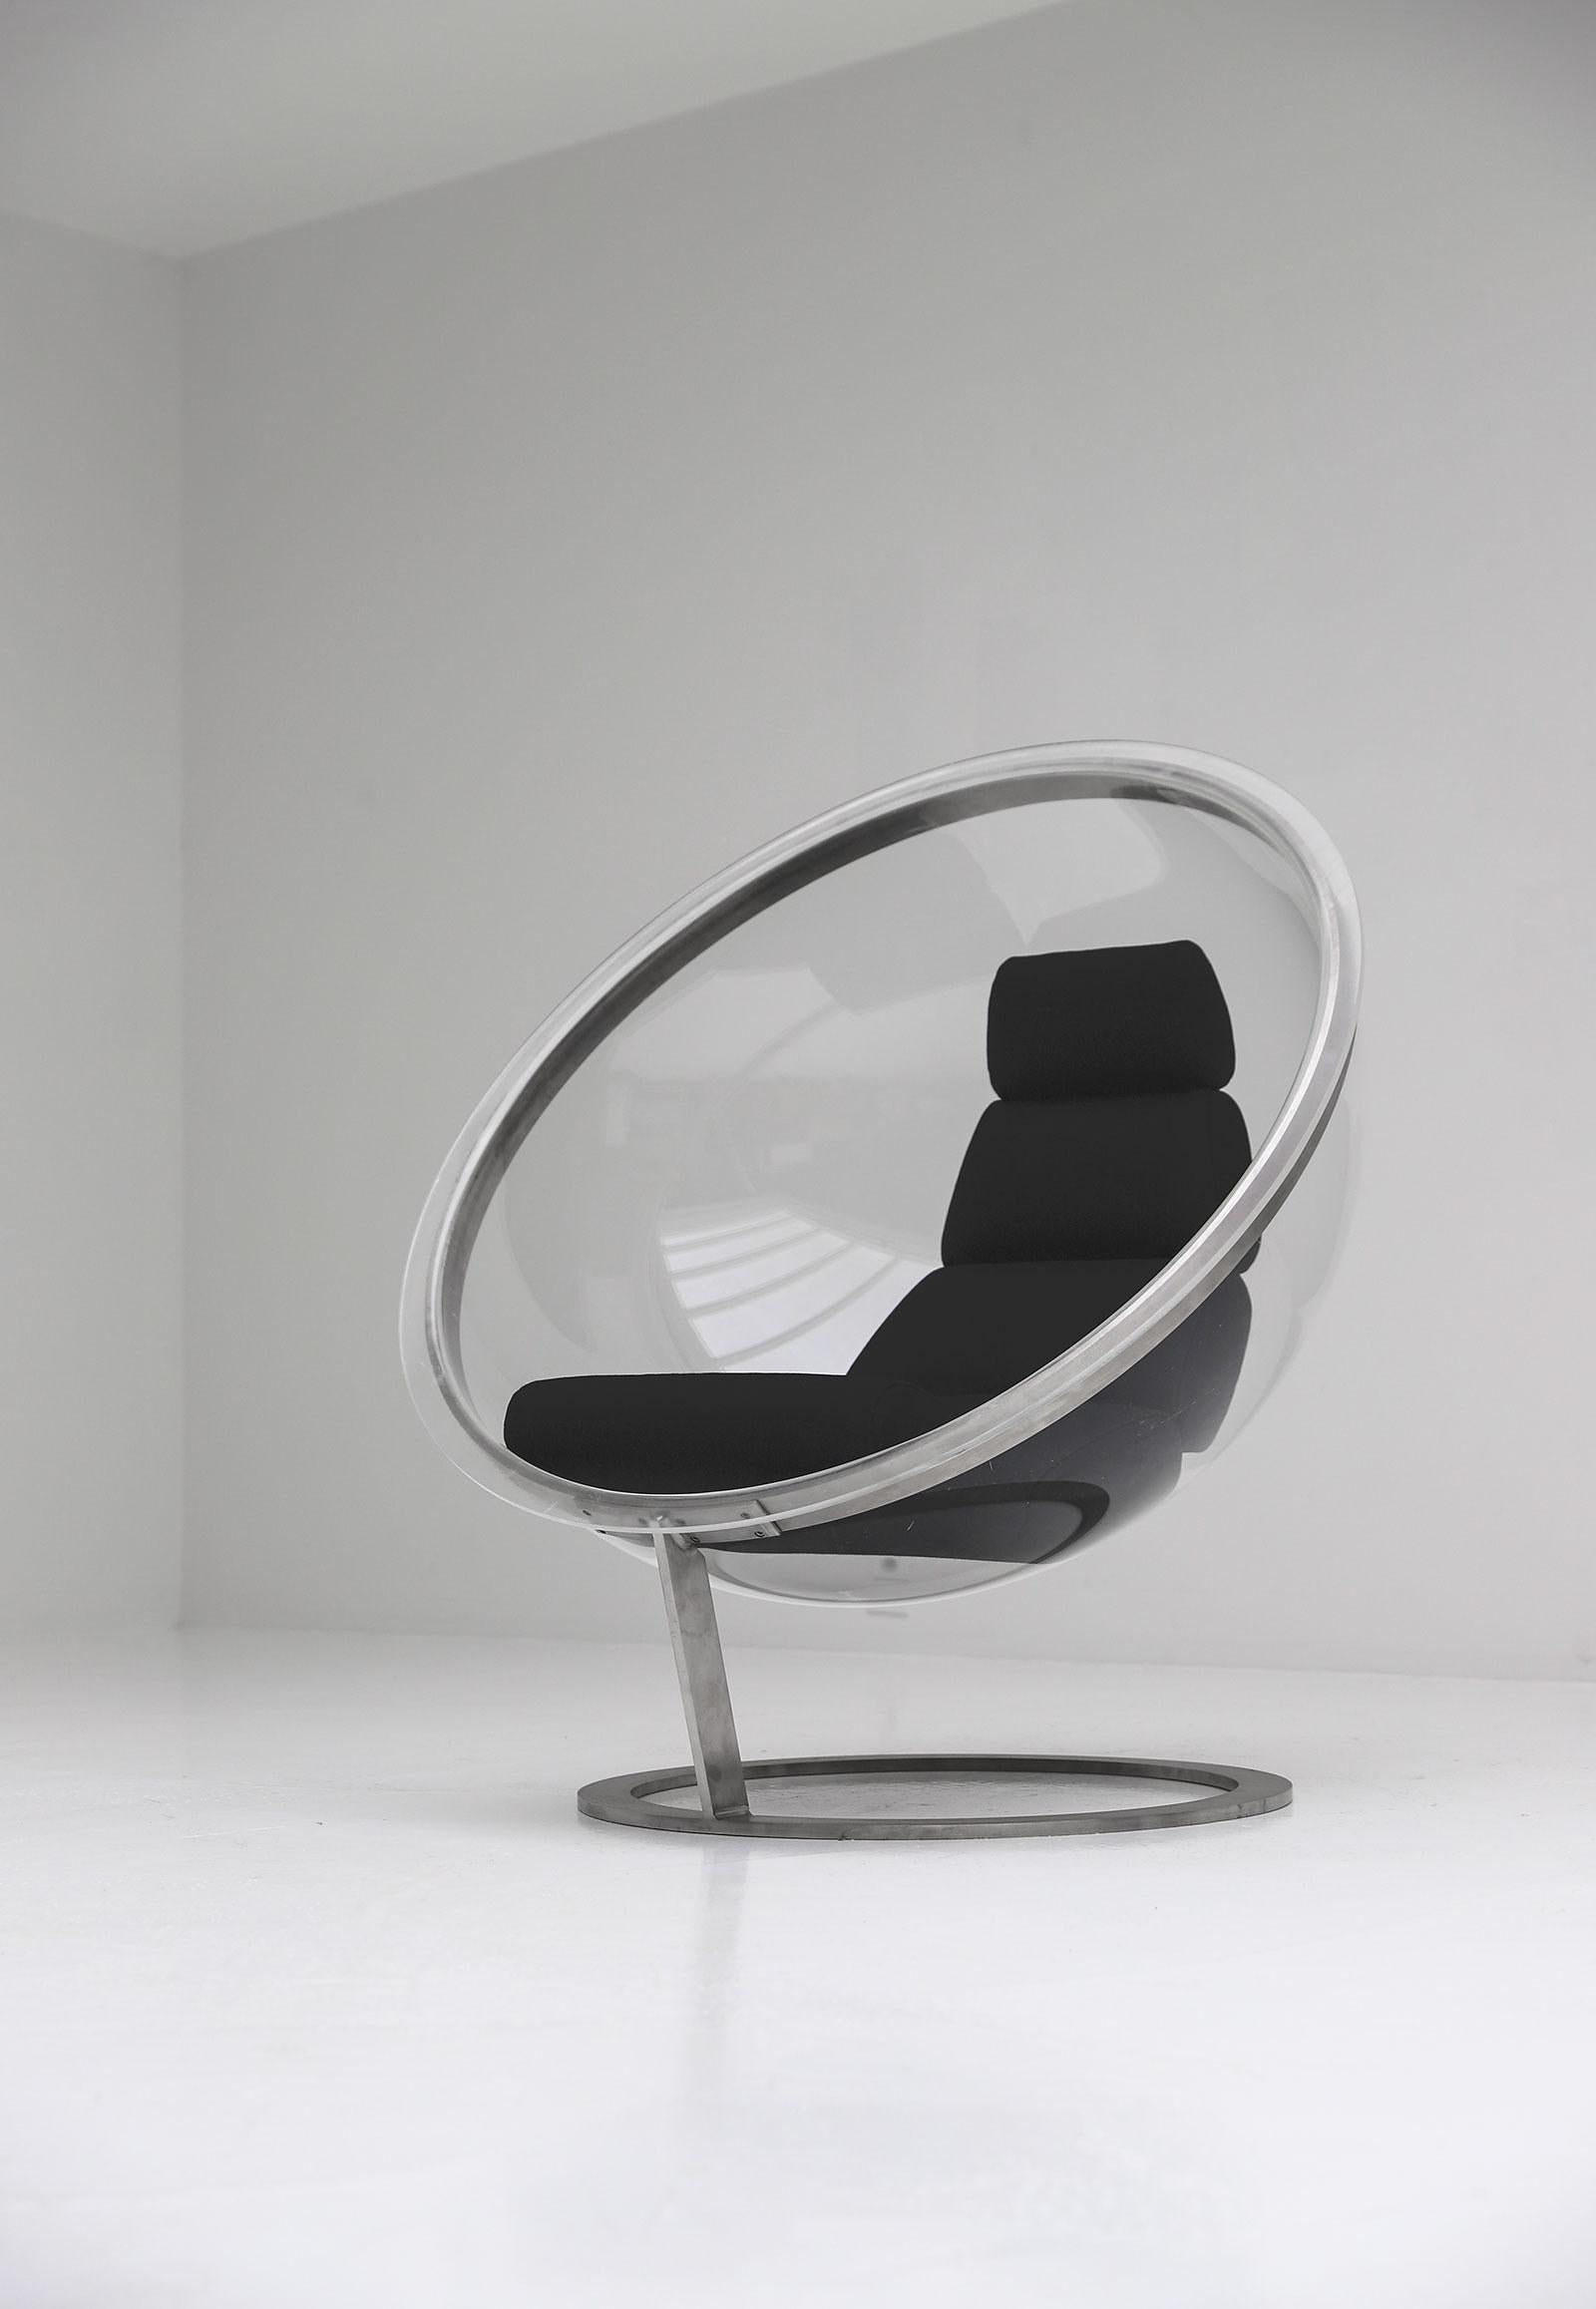 1970s Christian Daninos Bubbler Lucite chair 
Brand New black wool upholster 
Edition Forme Nouvelles
Great vintage condition 
This model of chair can be seen at the Museum of Decorative Arts in Paris.
 